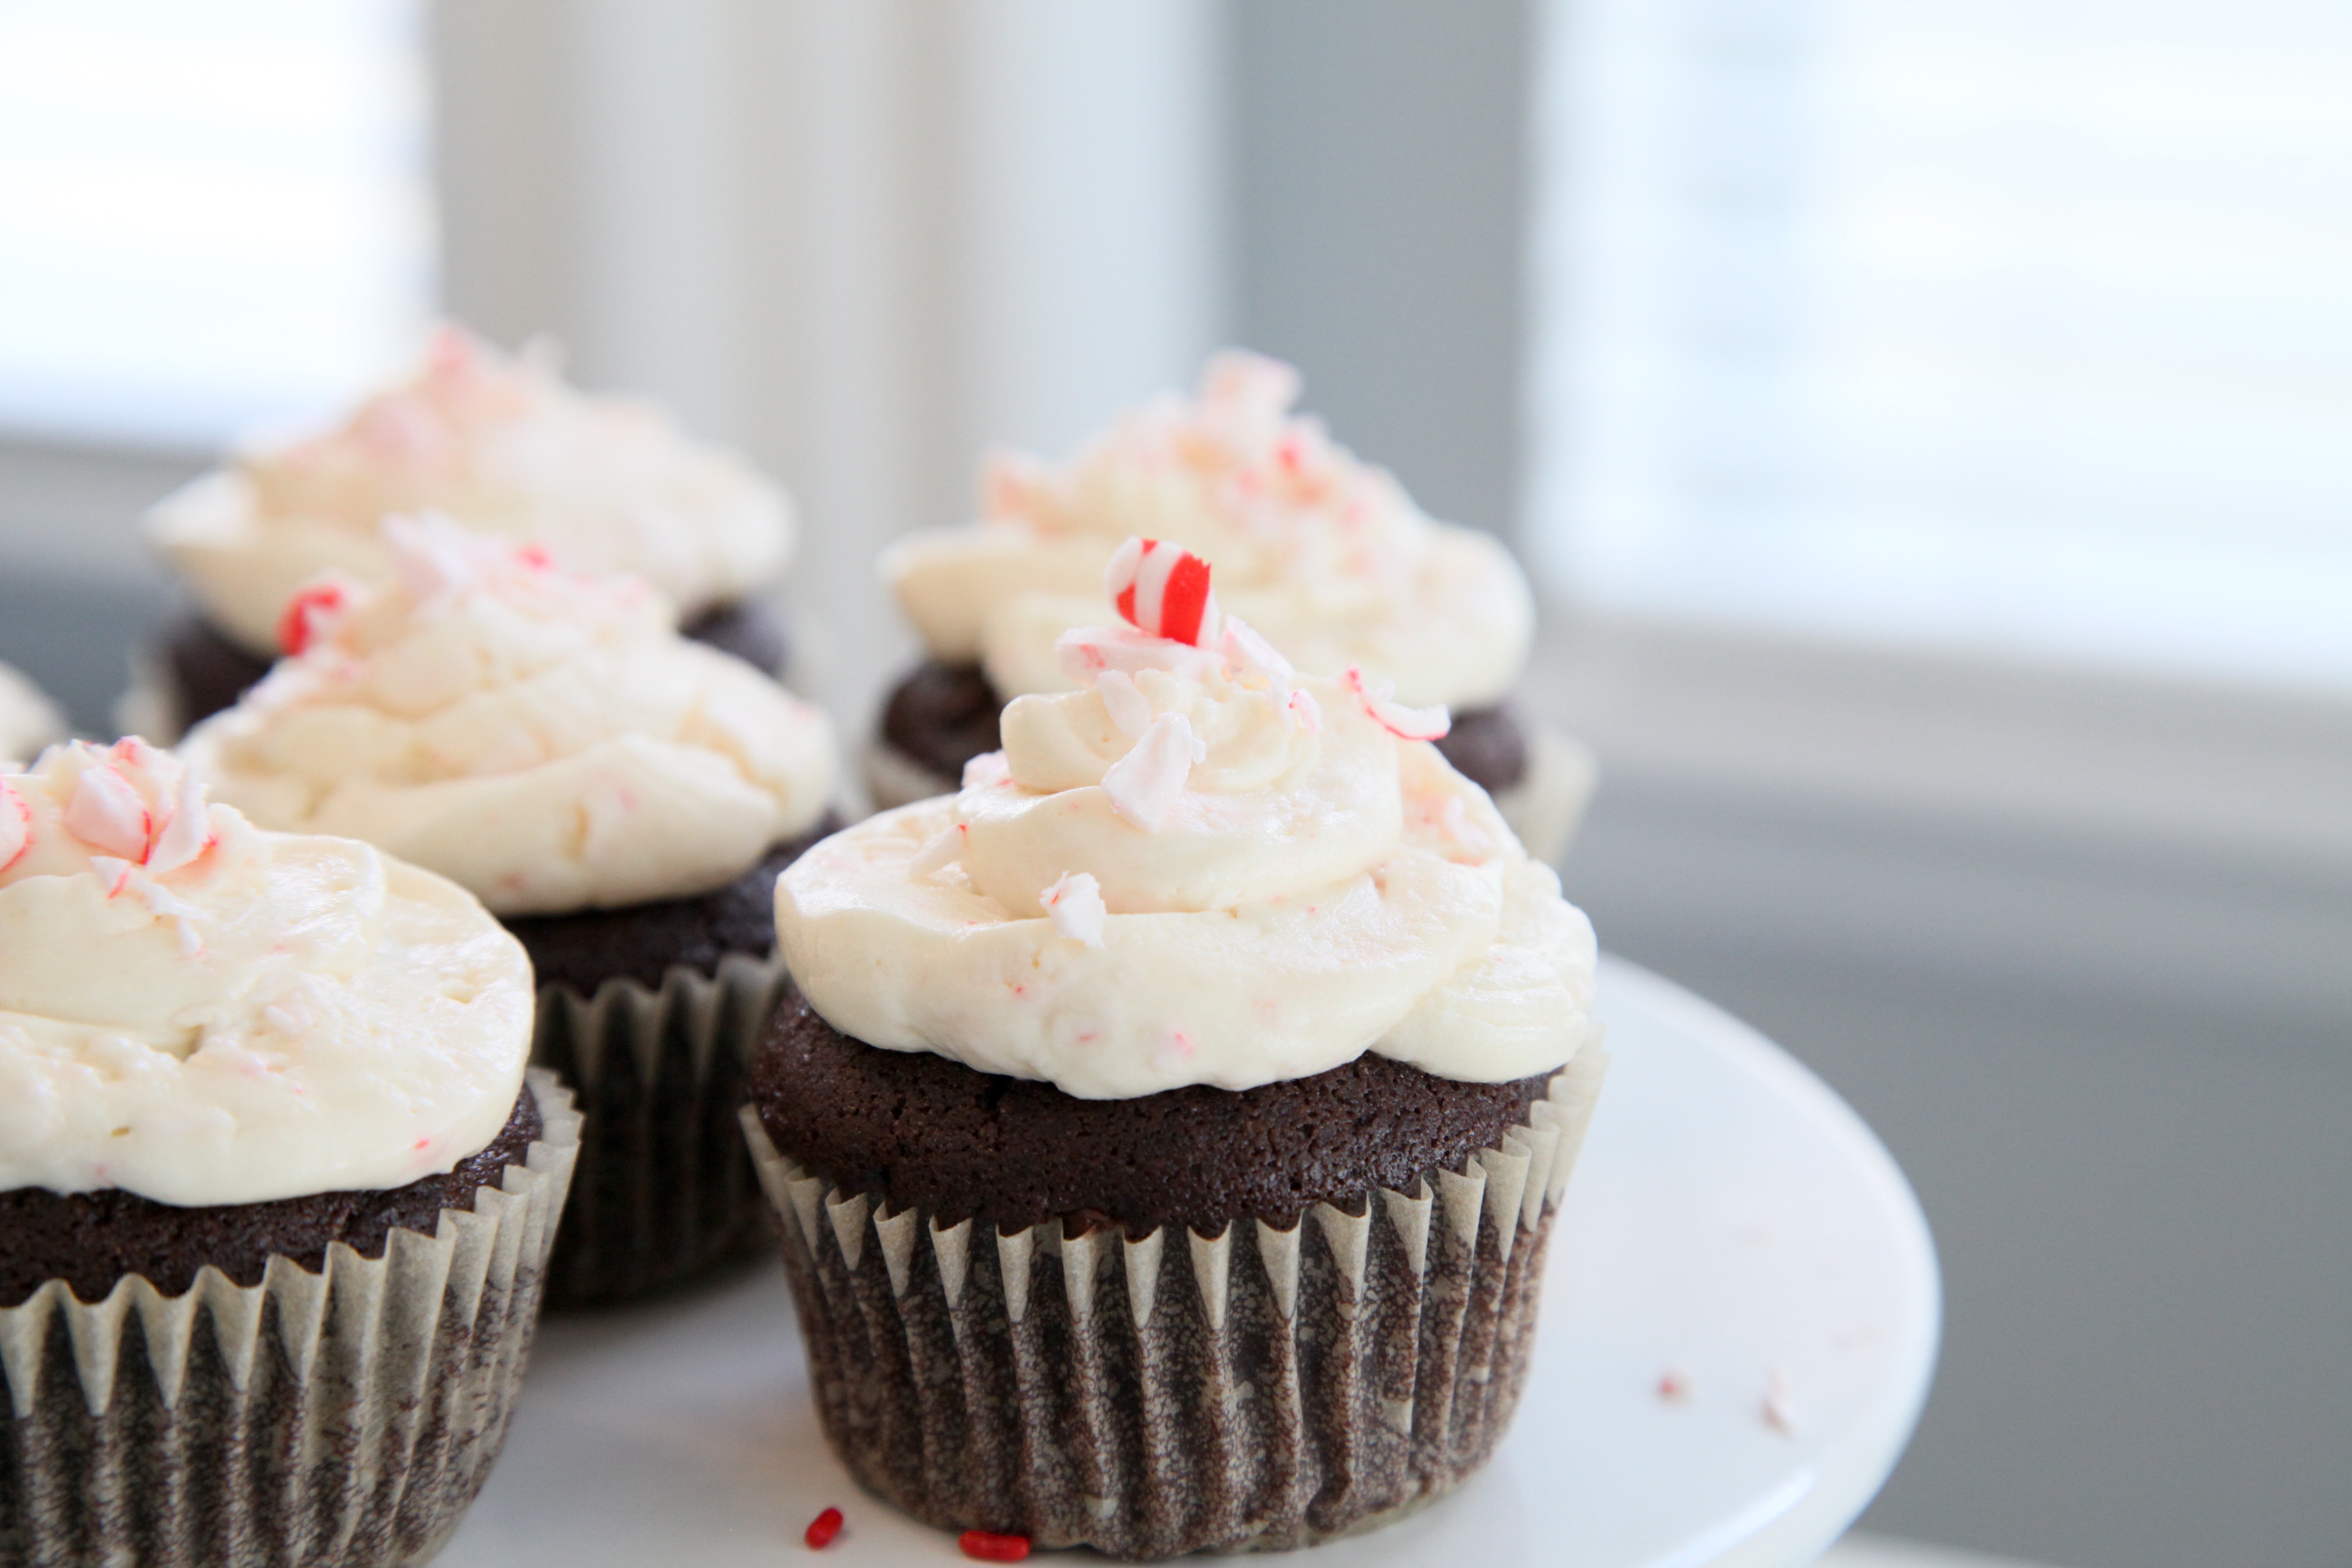 gluten and dairy free chocolate cupcakes with peppermint crunch frosting